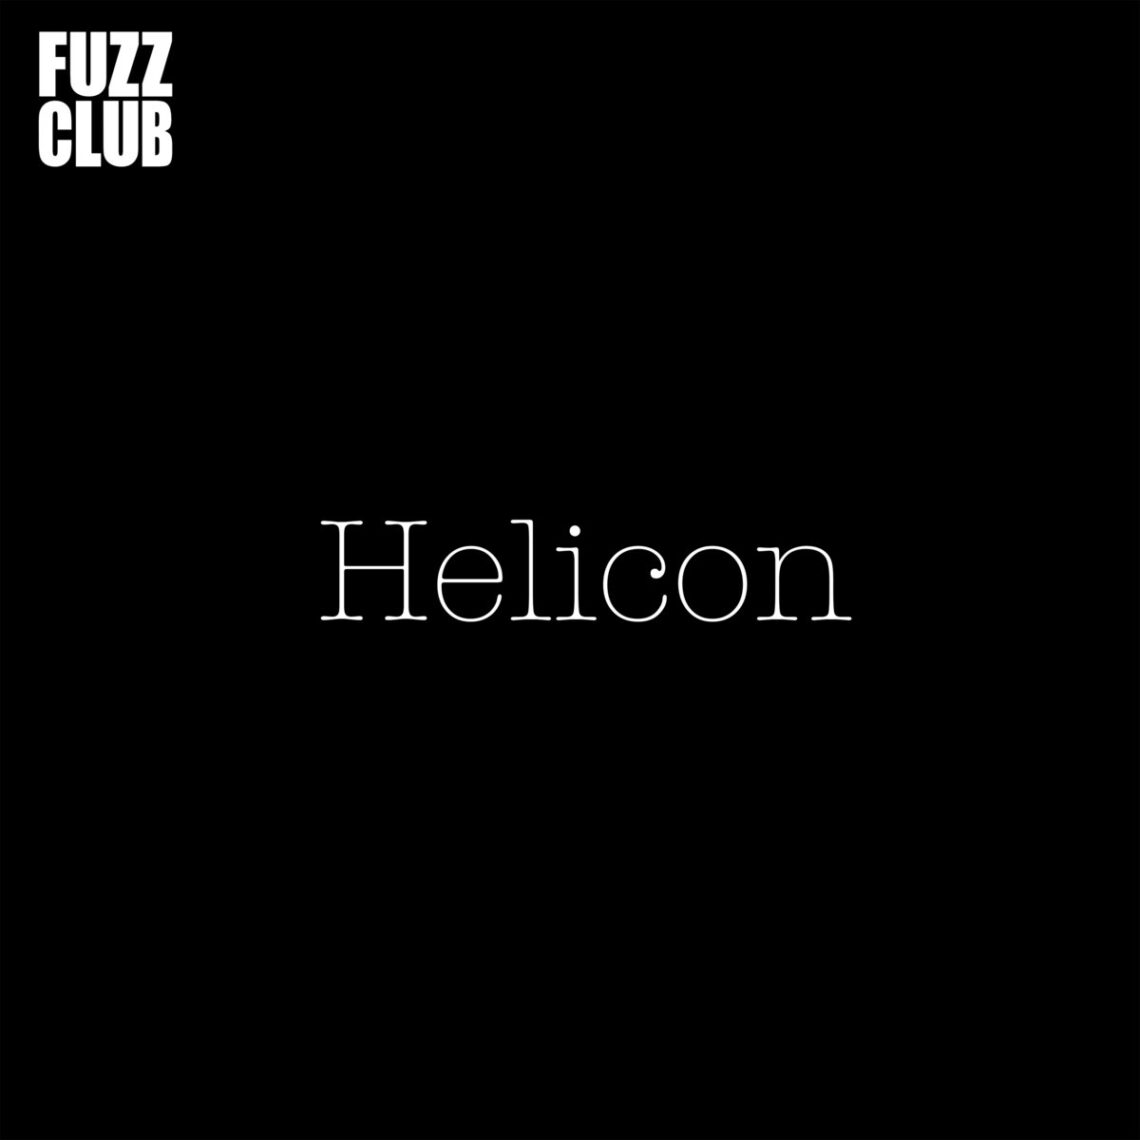 Helicon – Fuzz Club Session Review & Interview